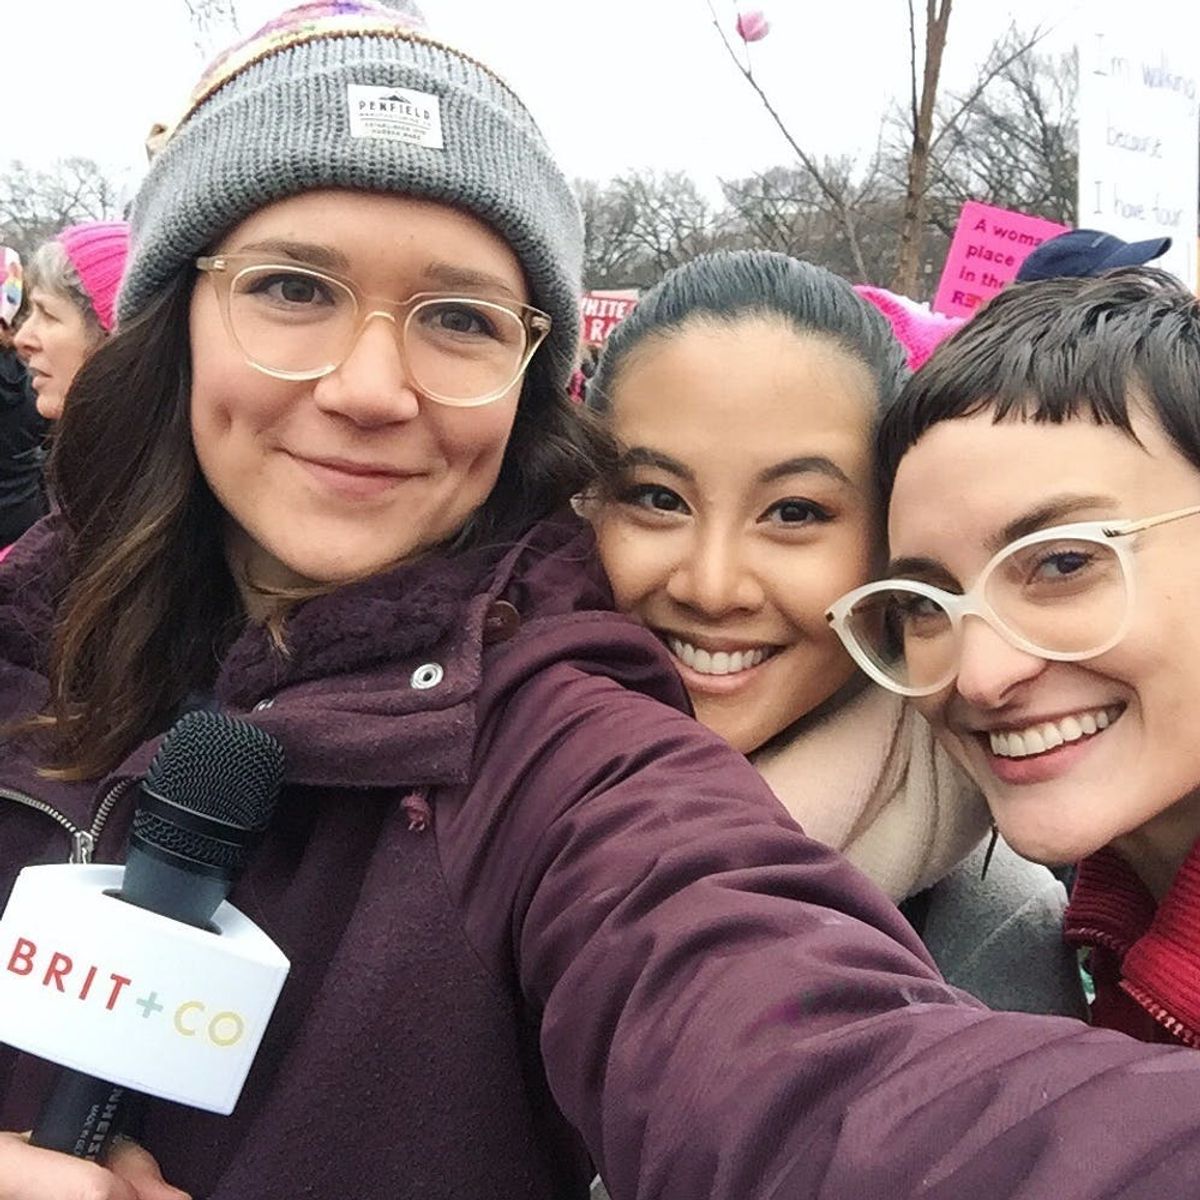 5 Things I Learned at Today’s Women’s March on Washington